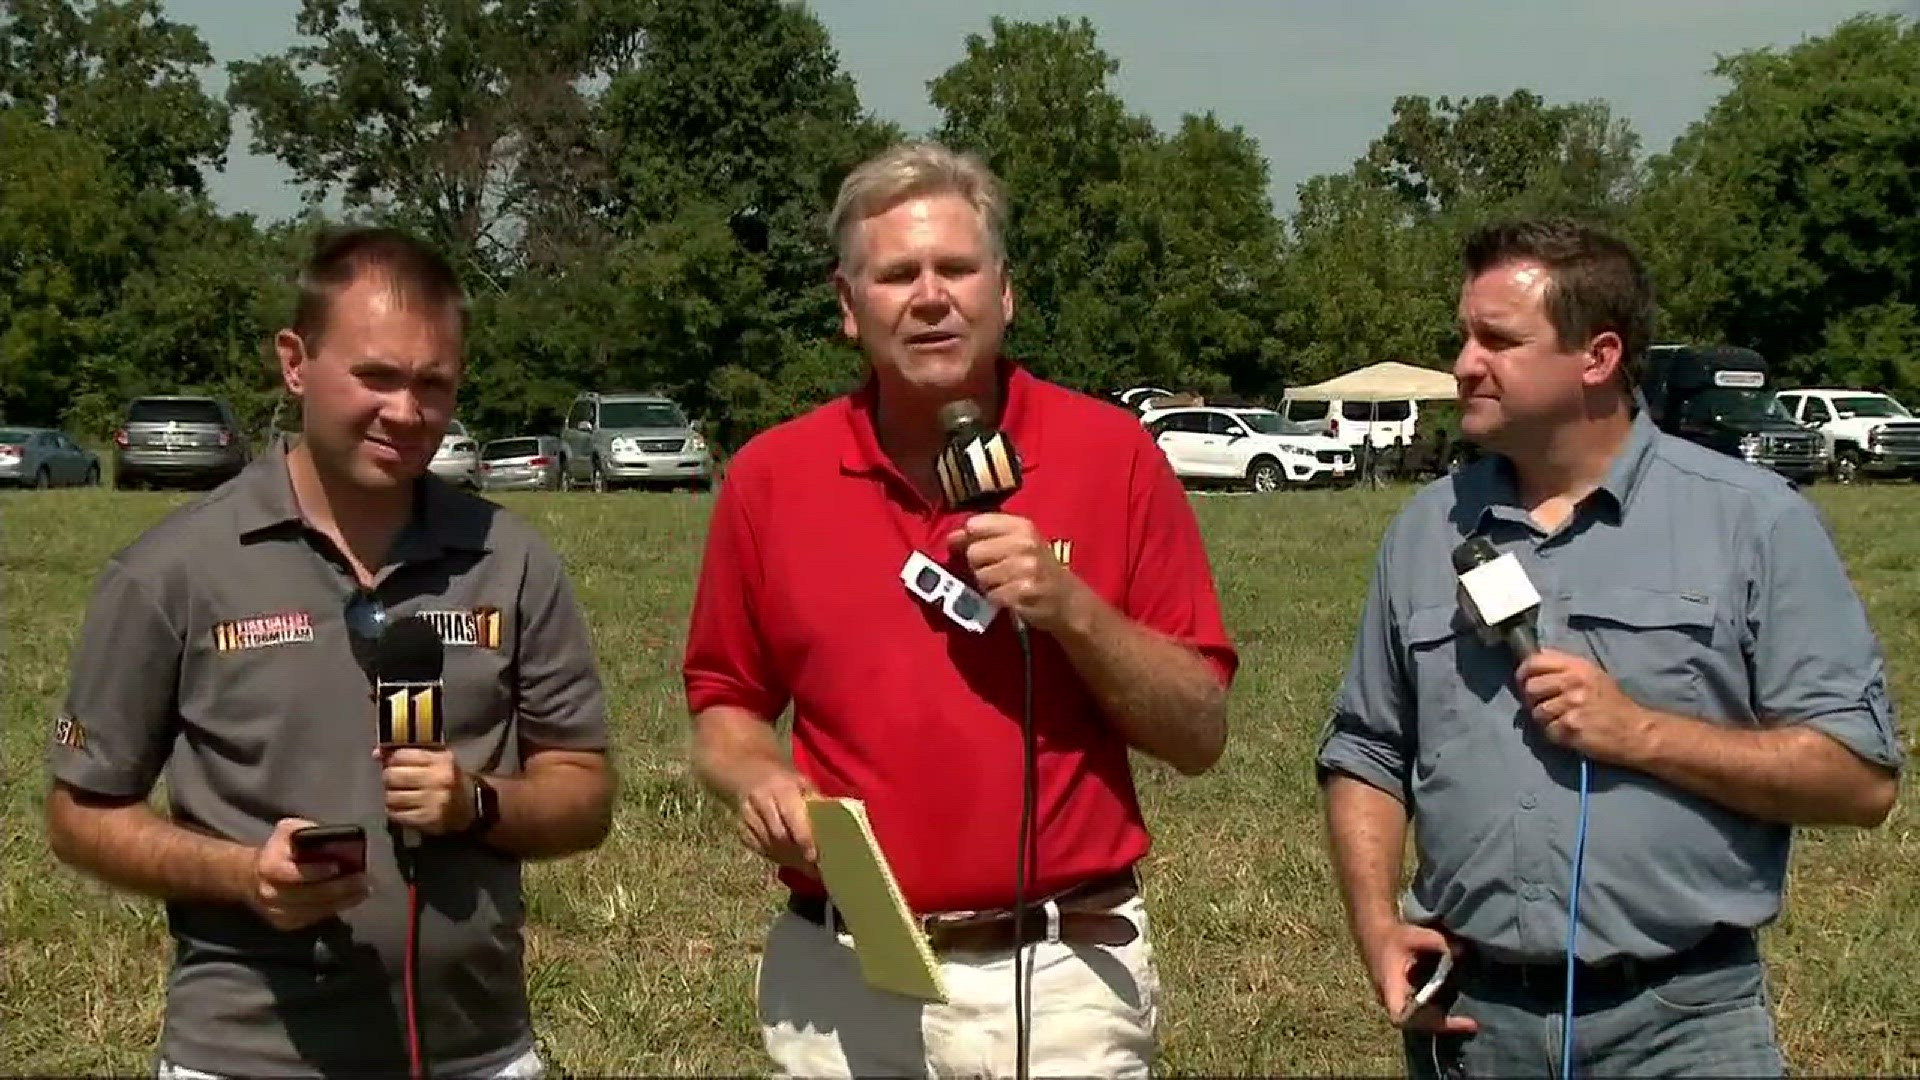 WHAS11's Doug Proffitt caught up with scientists from NASA in Hopkinsville, Ky.